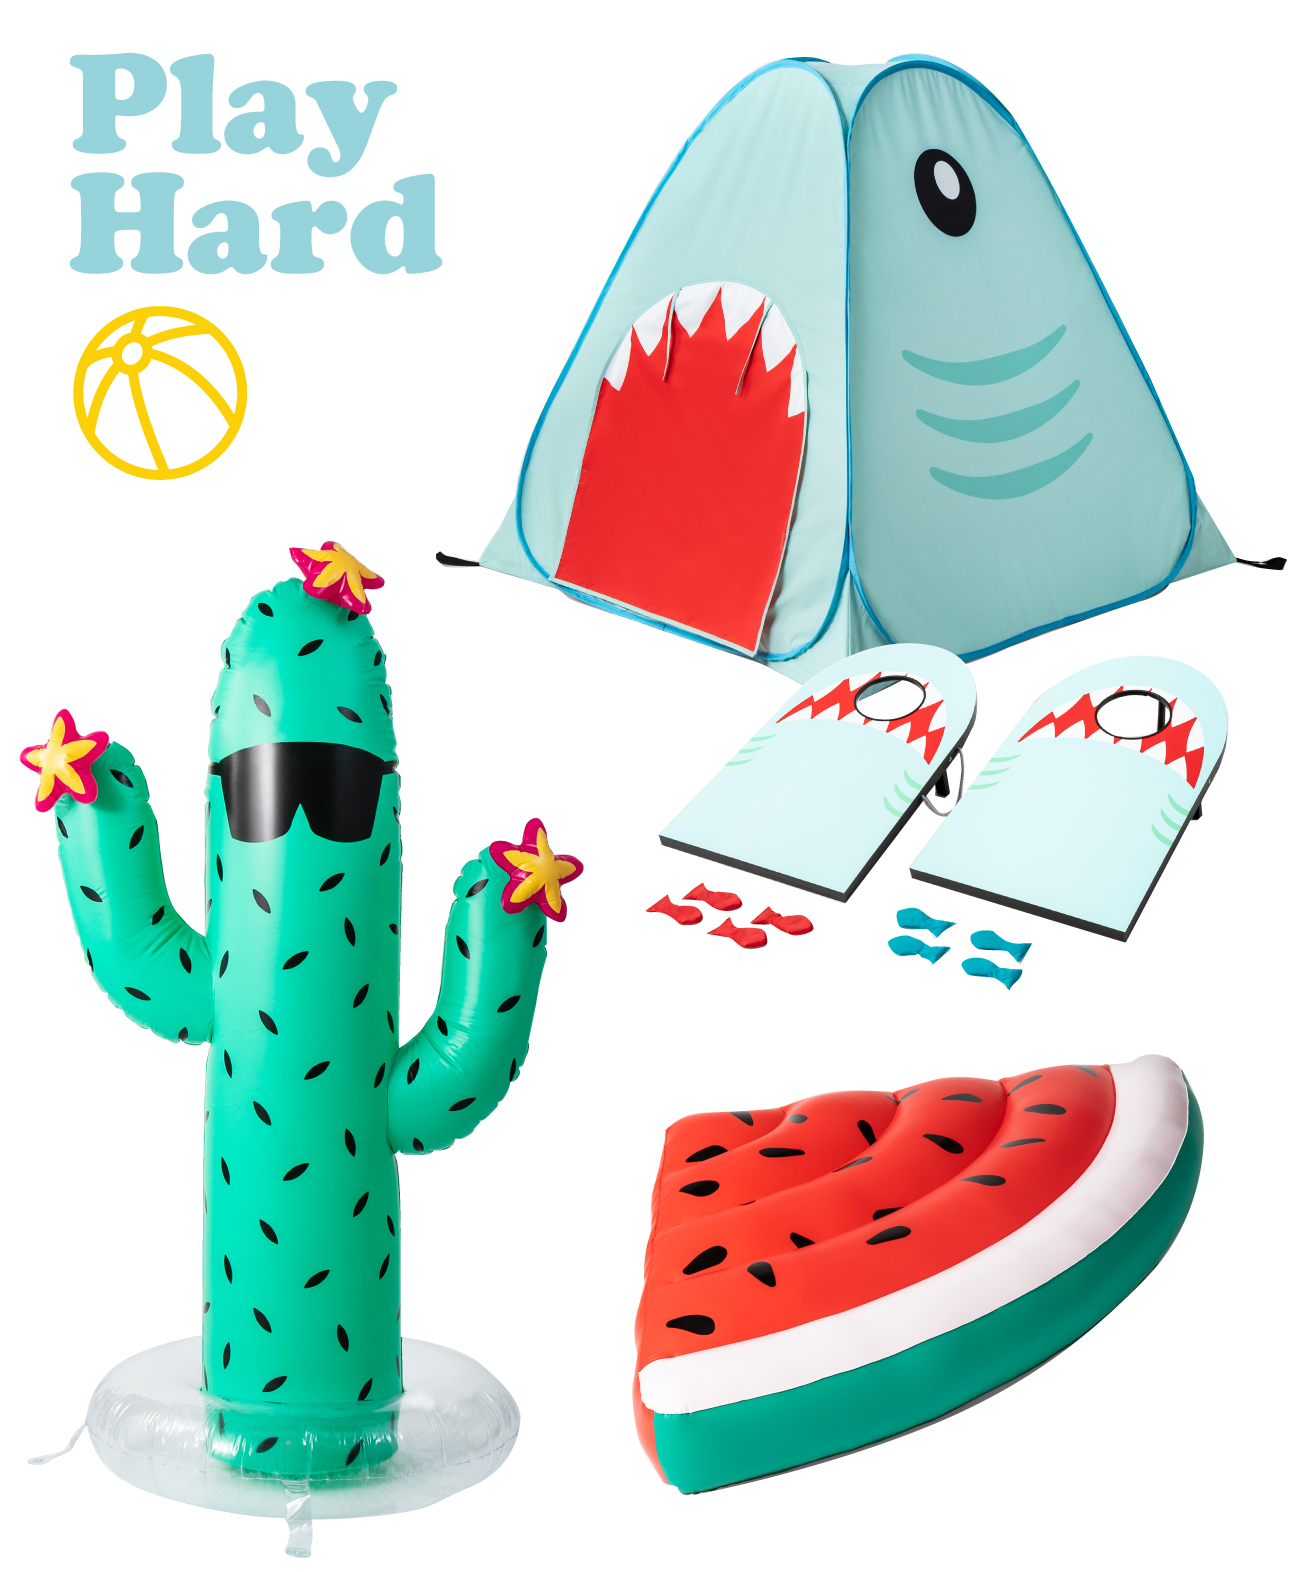 Photo collage with Play Hard text, beach ball icon, shark tent, shark bean bag toss game, cactus sprinkler and watermelon slice float